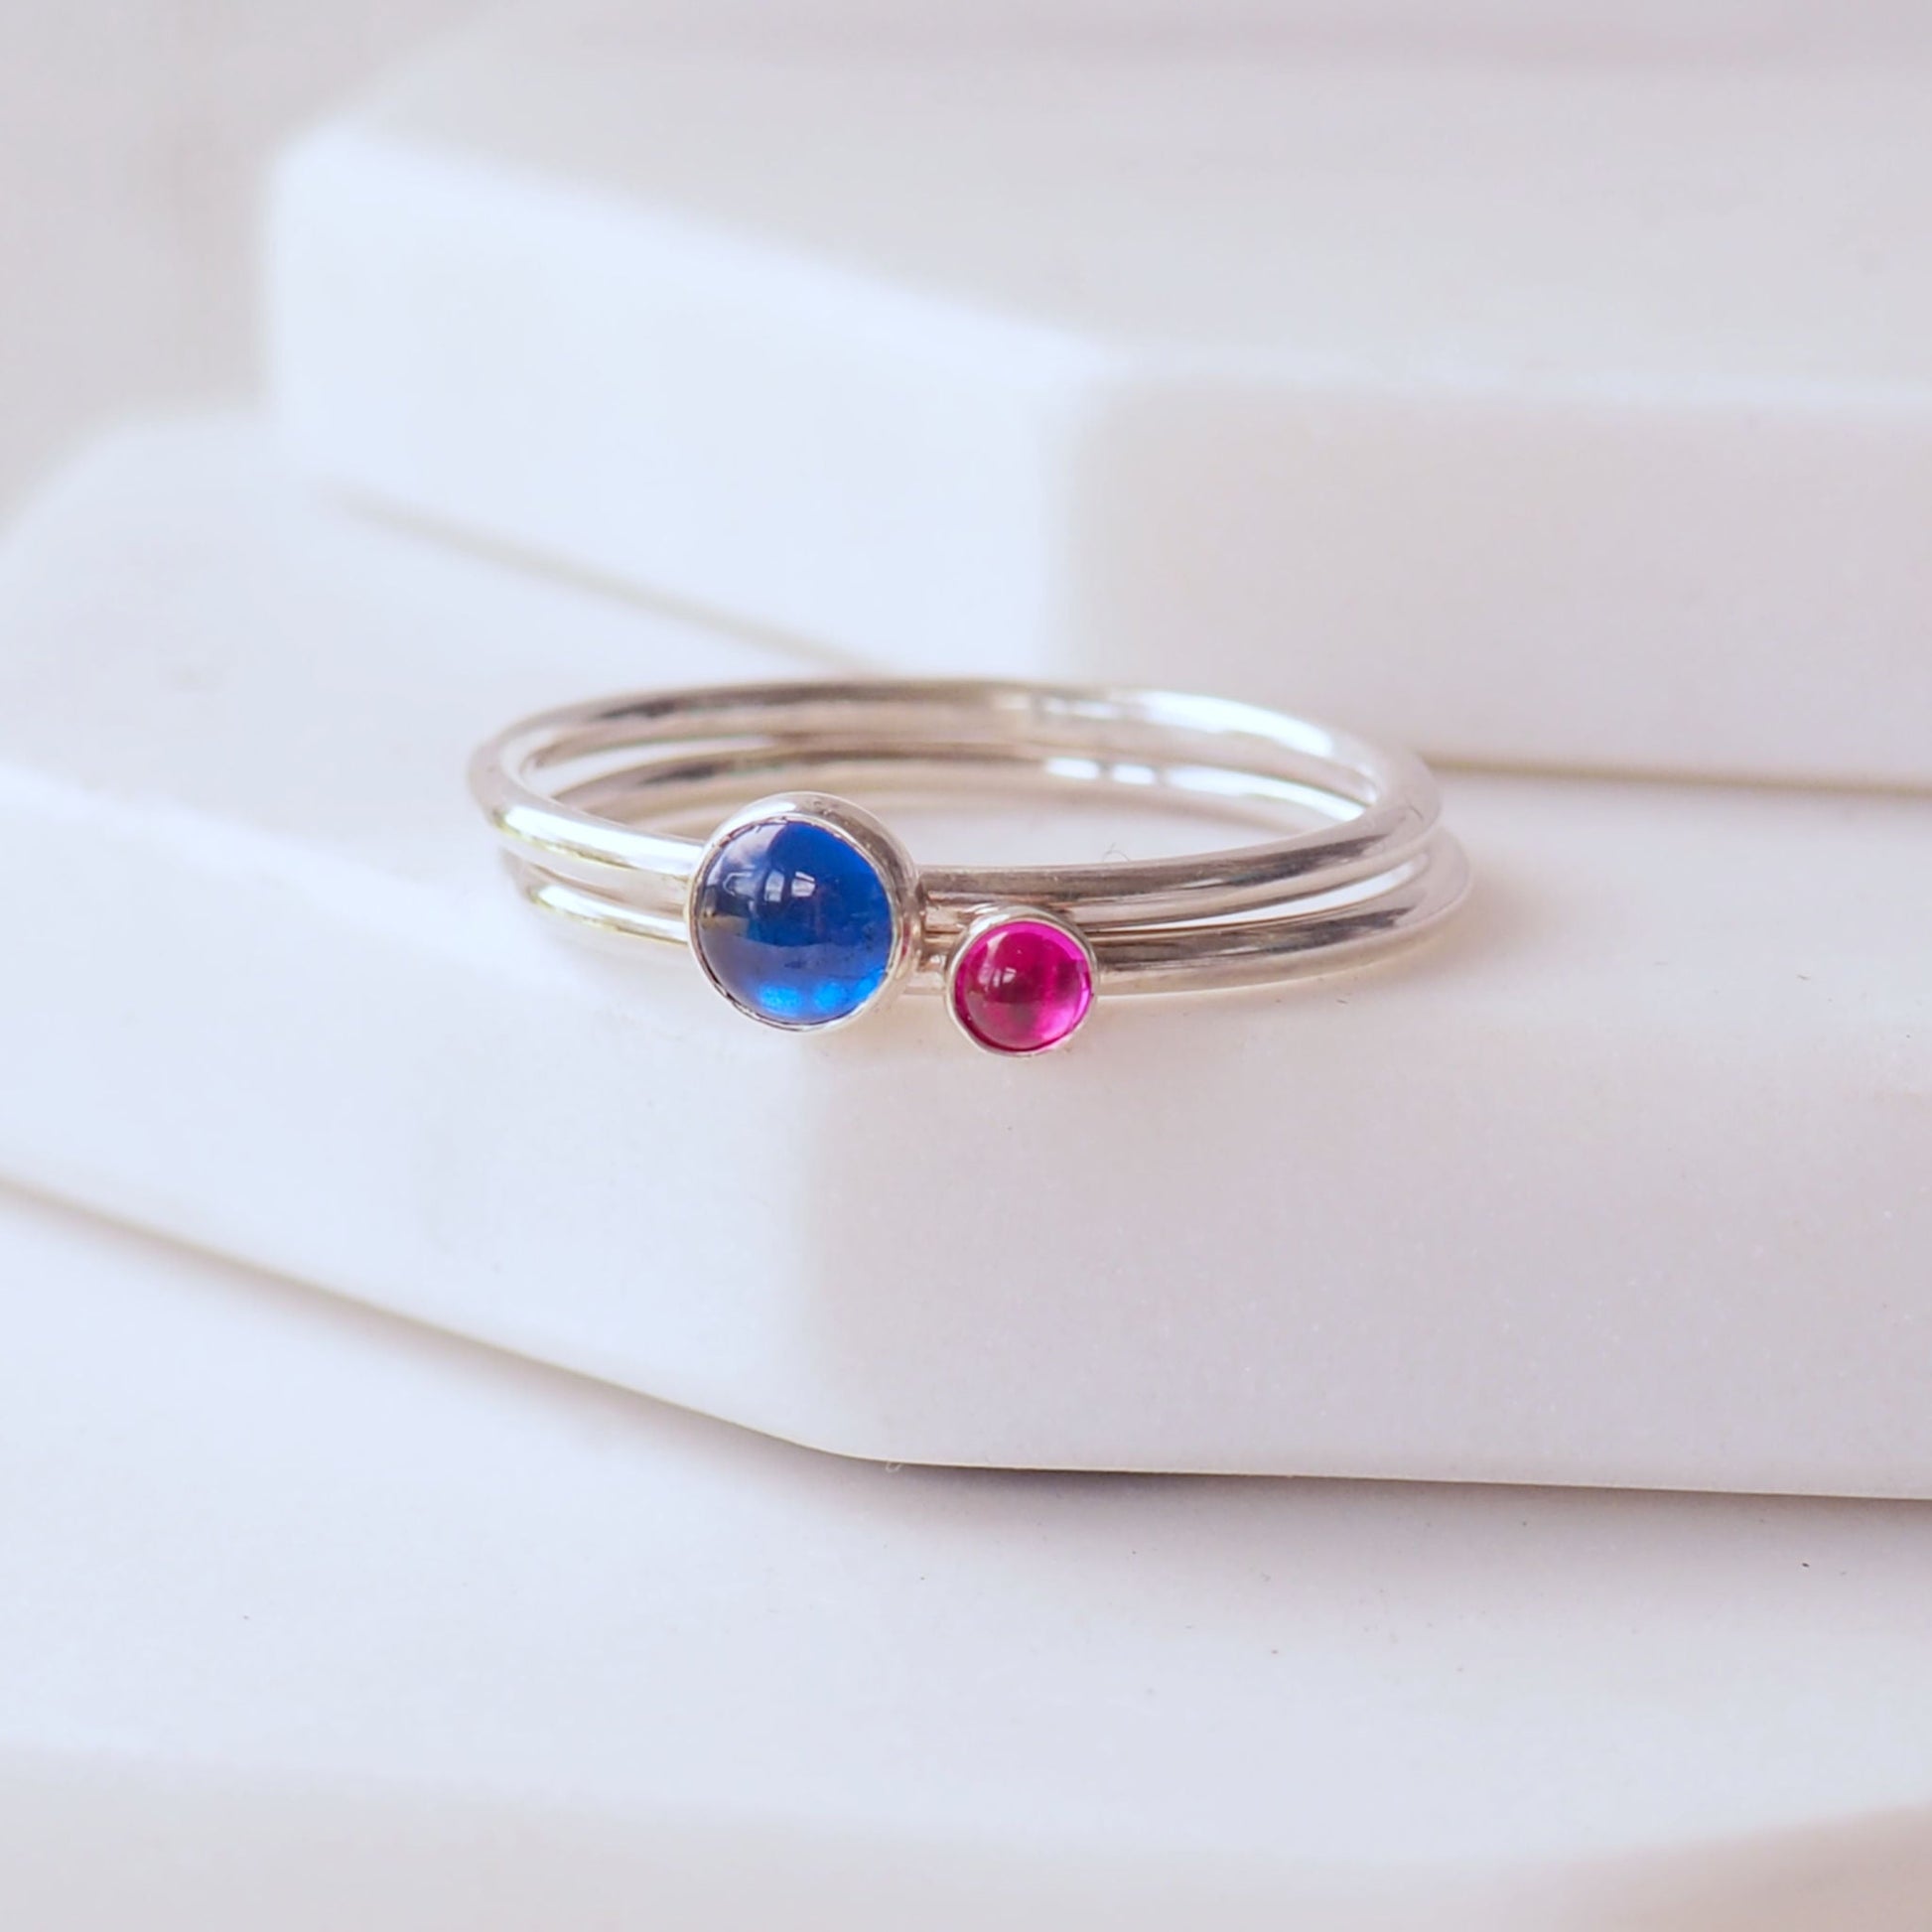 Two ring set with A september and July birthstone - a bright blue lab sapphire and a bright pink Lab Ruby. Handmade in Scotland by maram jewellery